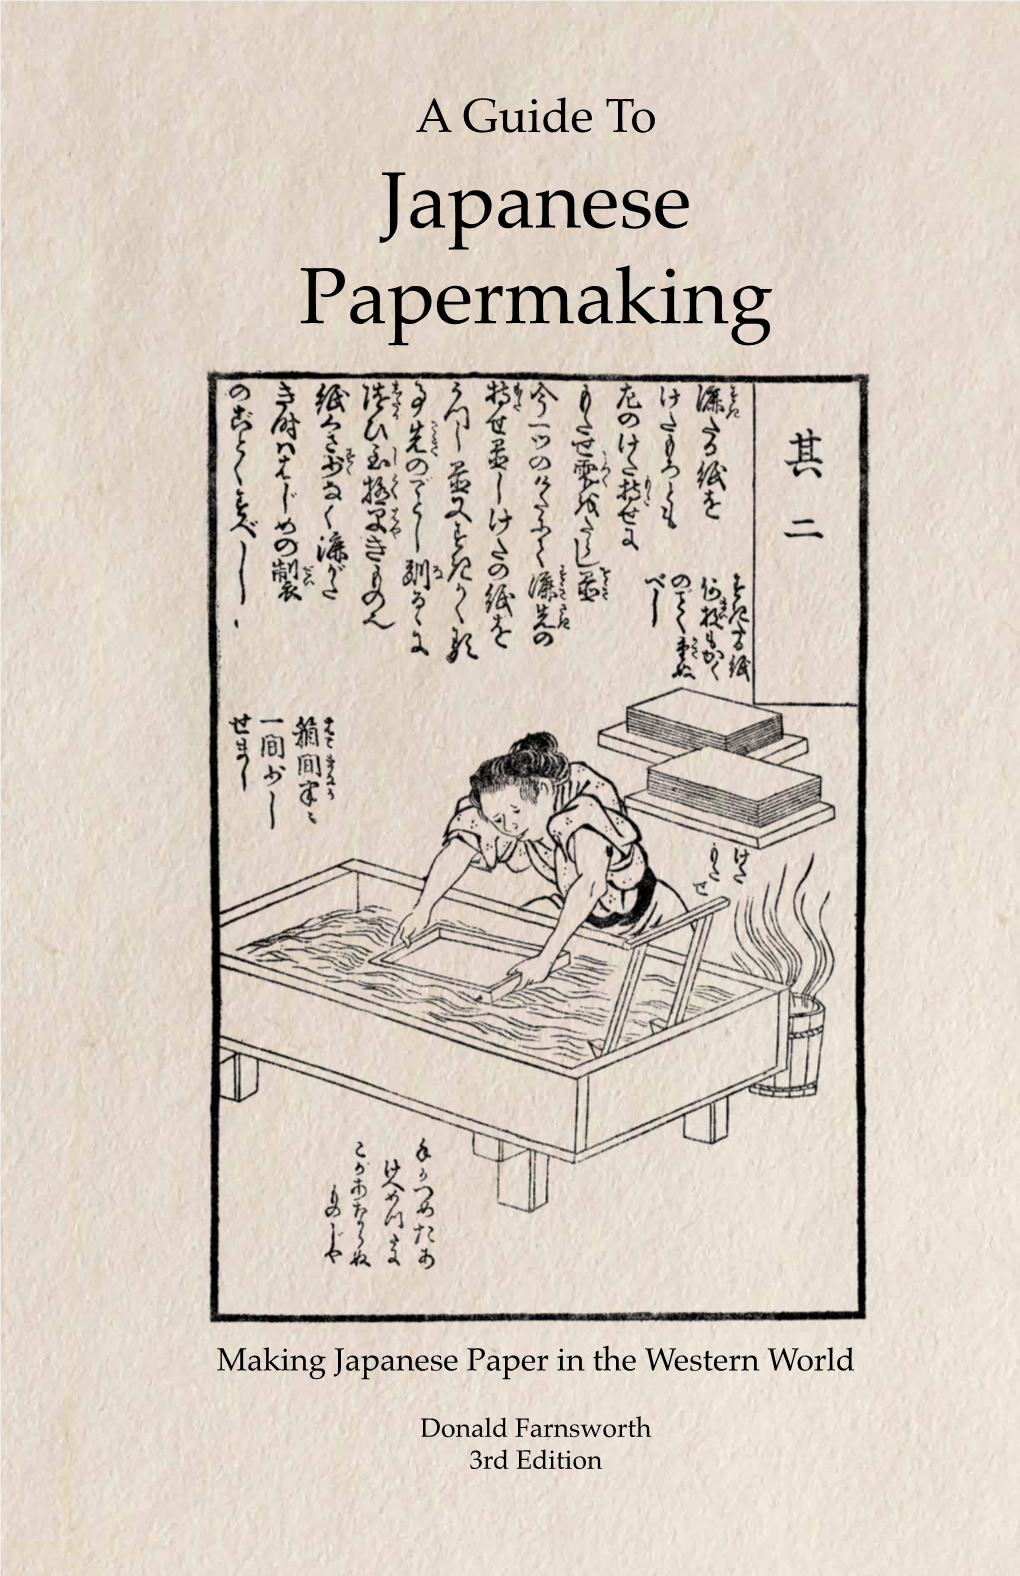 A Guide to Japanese Papermaking